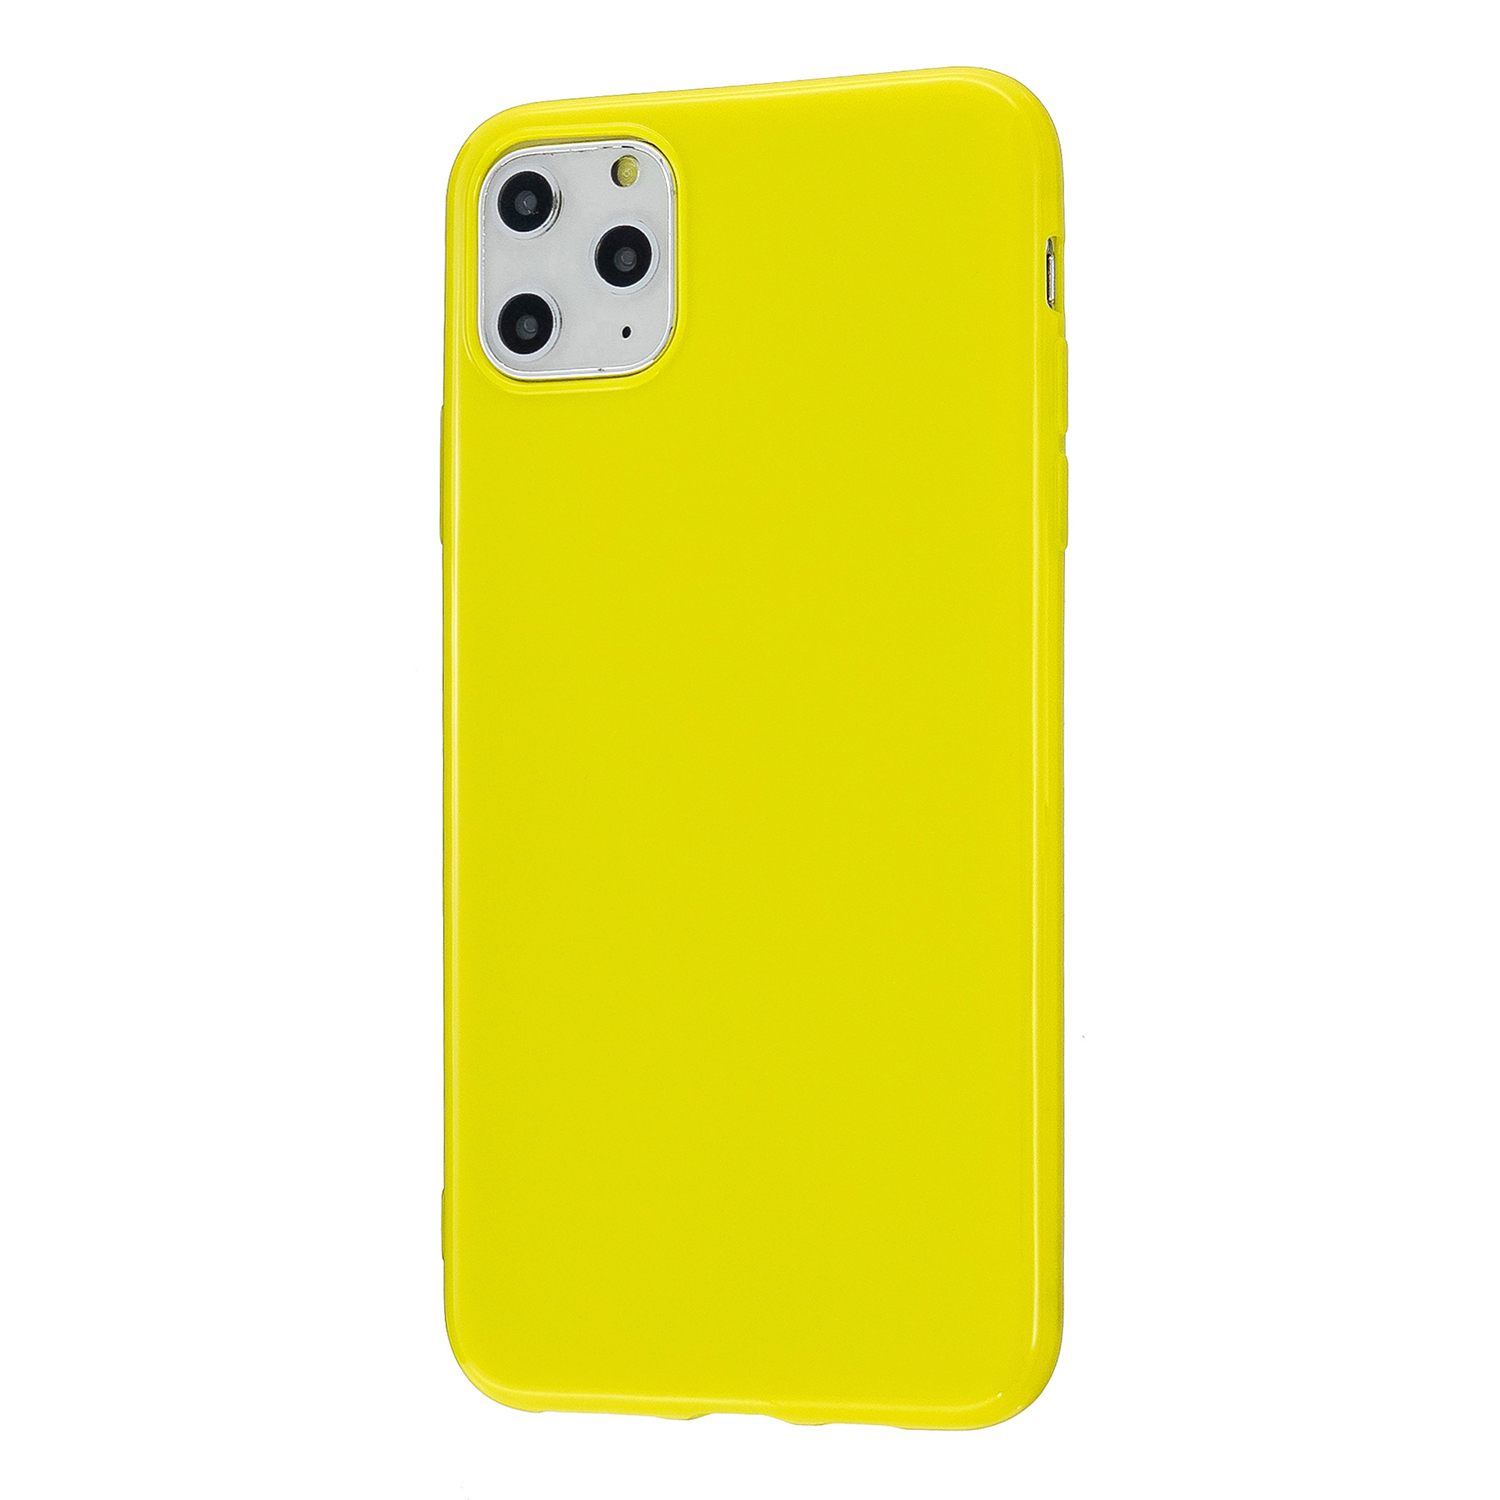 For iPhone 11/11 Pro/11 Pro Max Smartphone Cover Slim Fit Glossy TPU Phone Case Full Body Protection Shell Lemon yellow